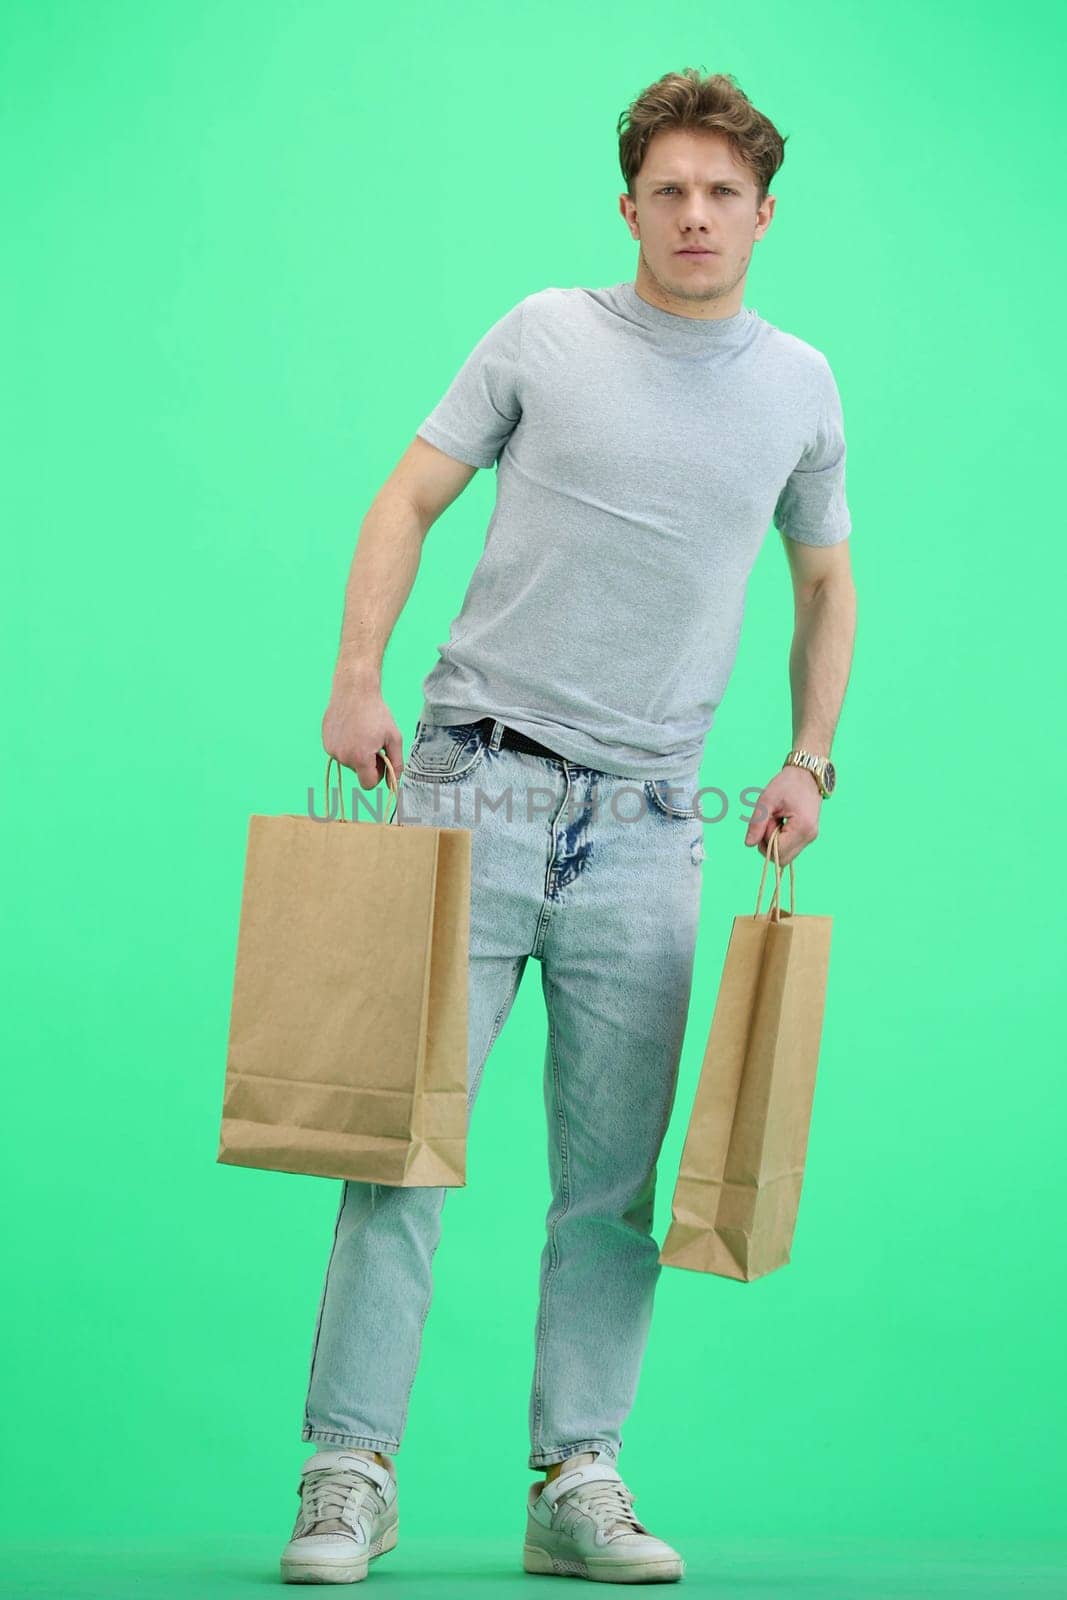 Man, on a green background, full-length, with bags.